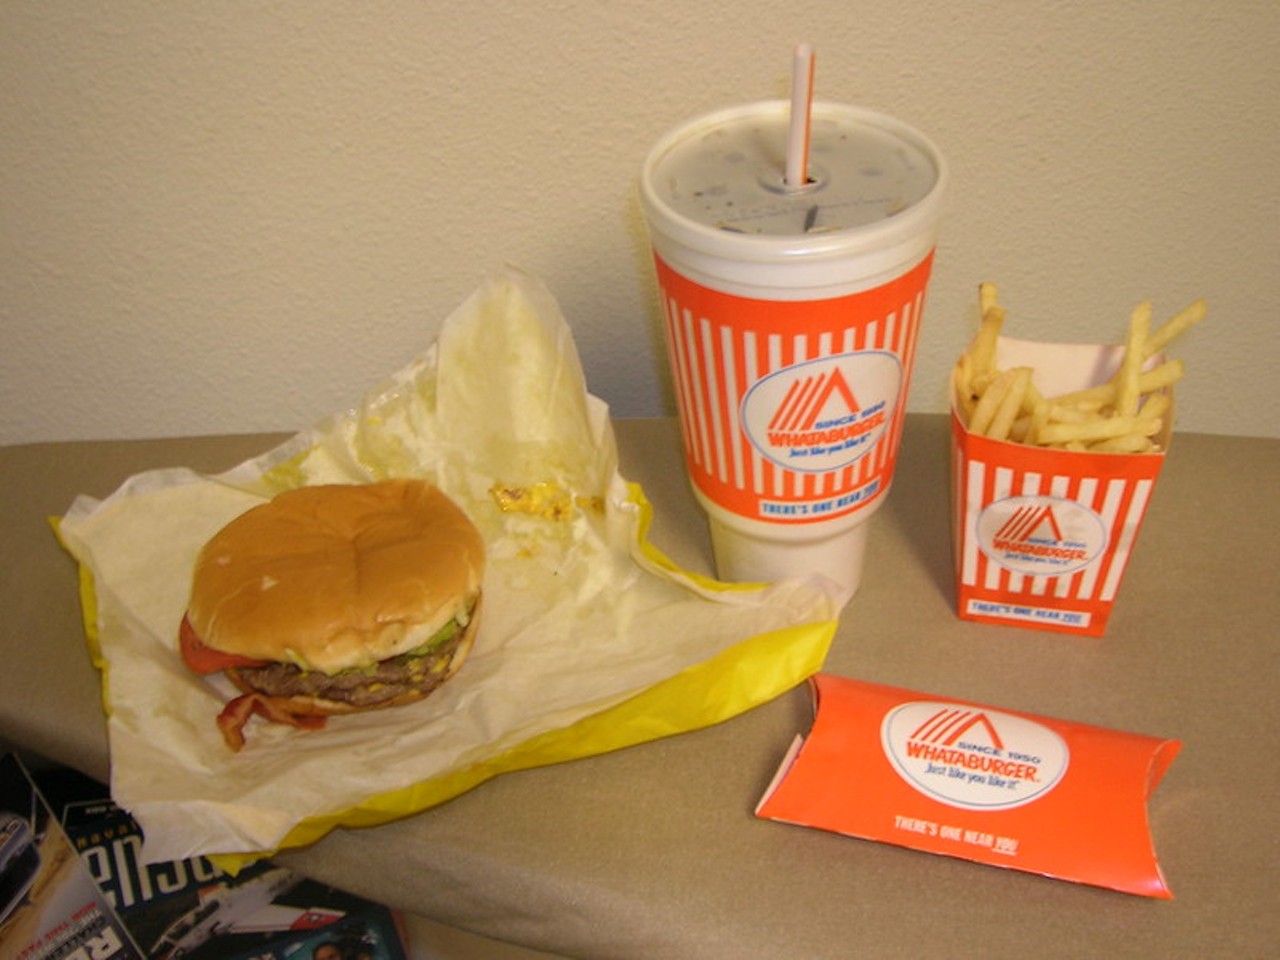 Whataburger
Texans won't shut up about this place, so it must be good.